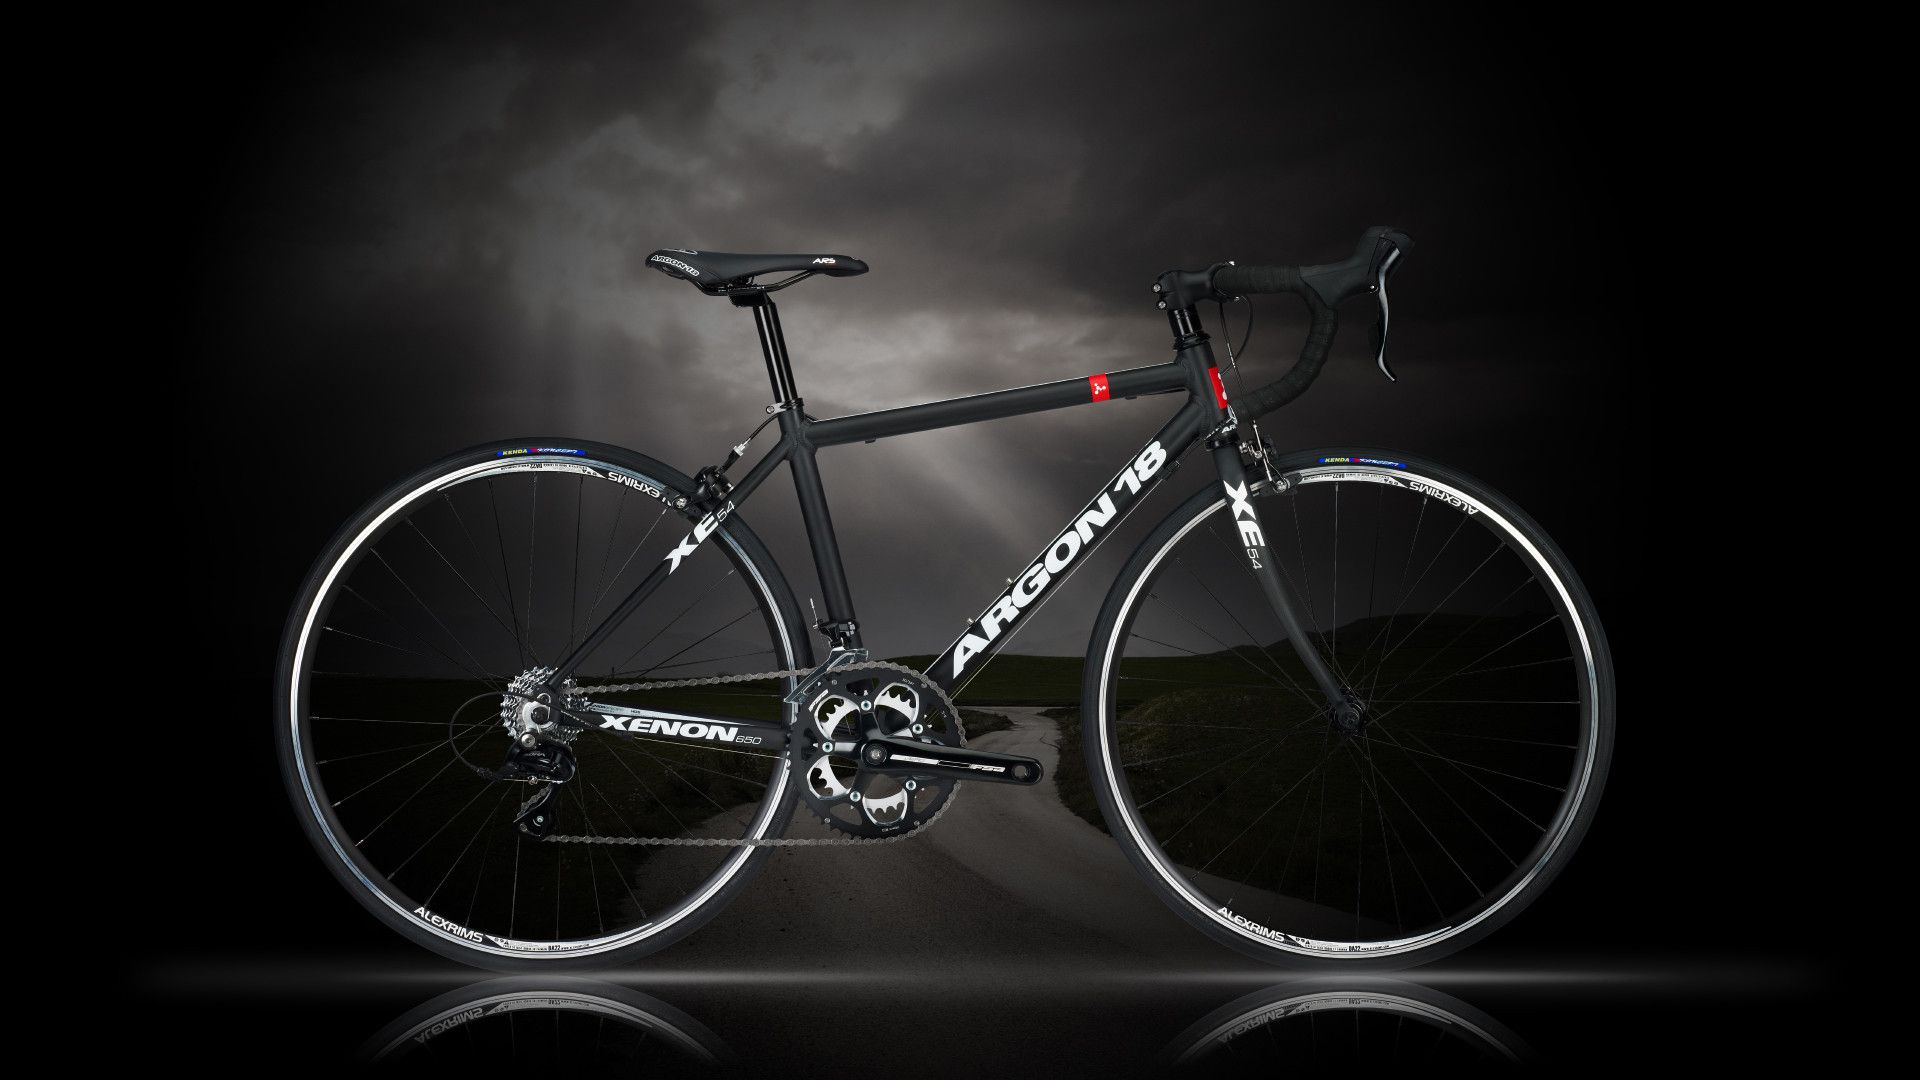 Road Bikes Wallpaper Awesome Pictures And